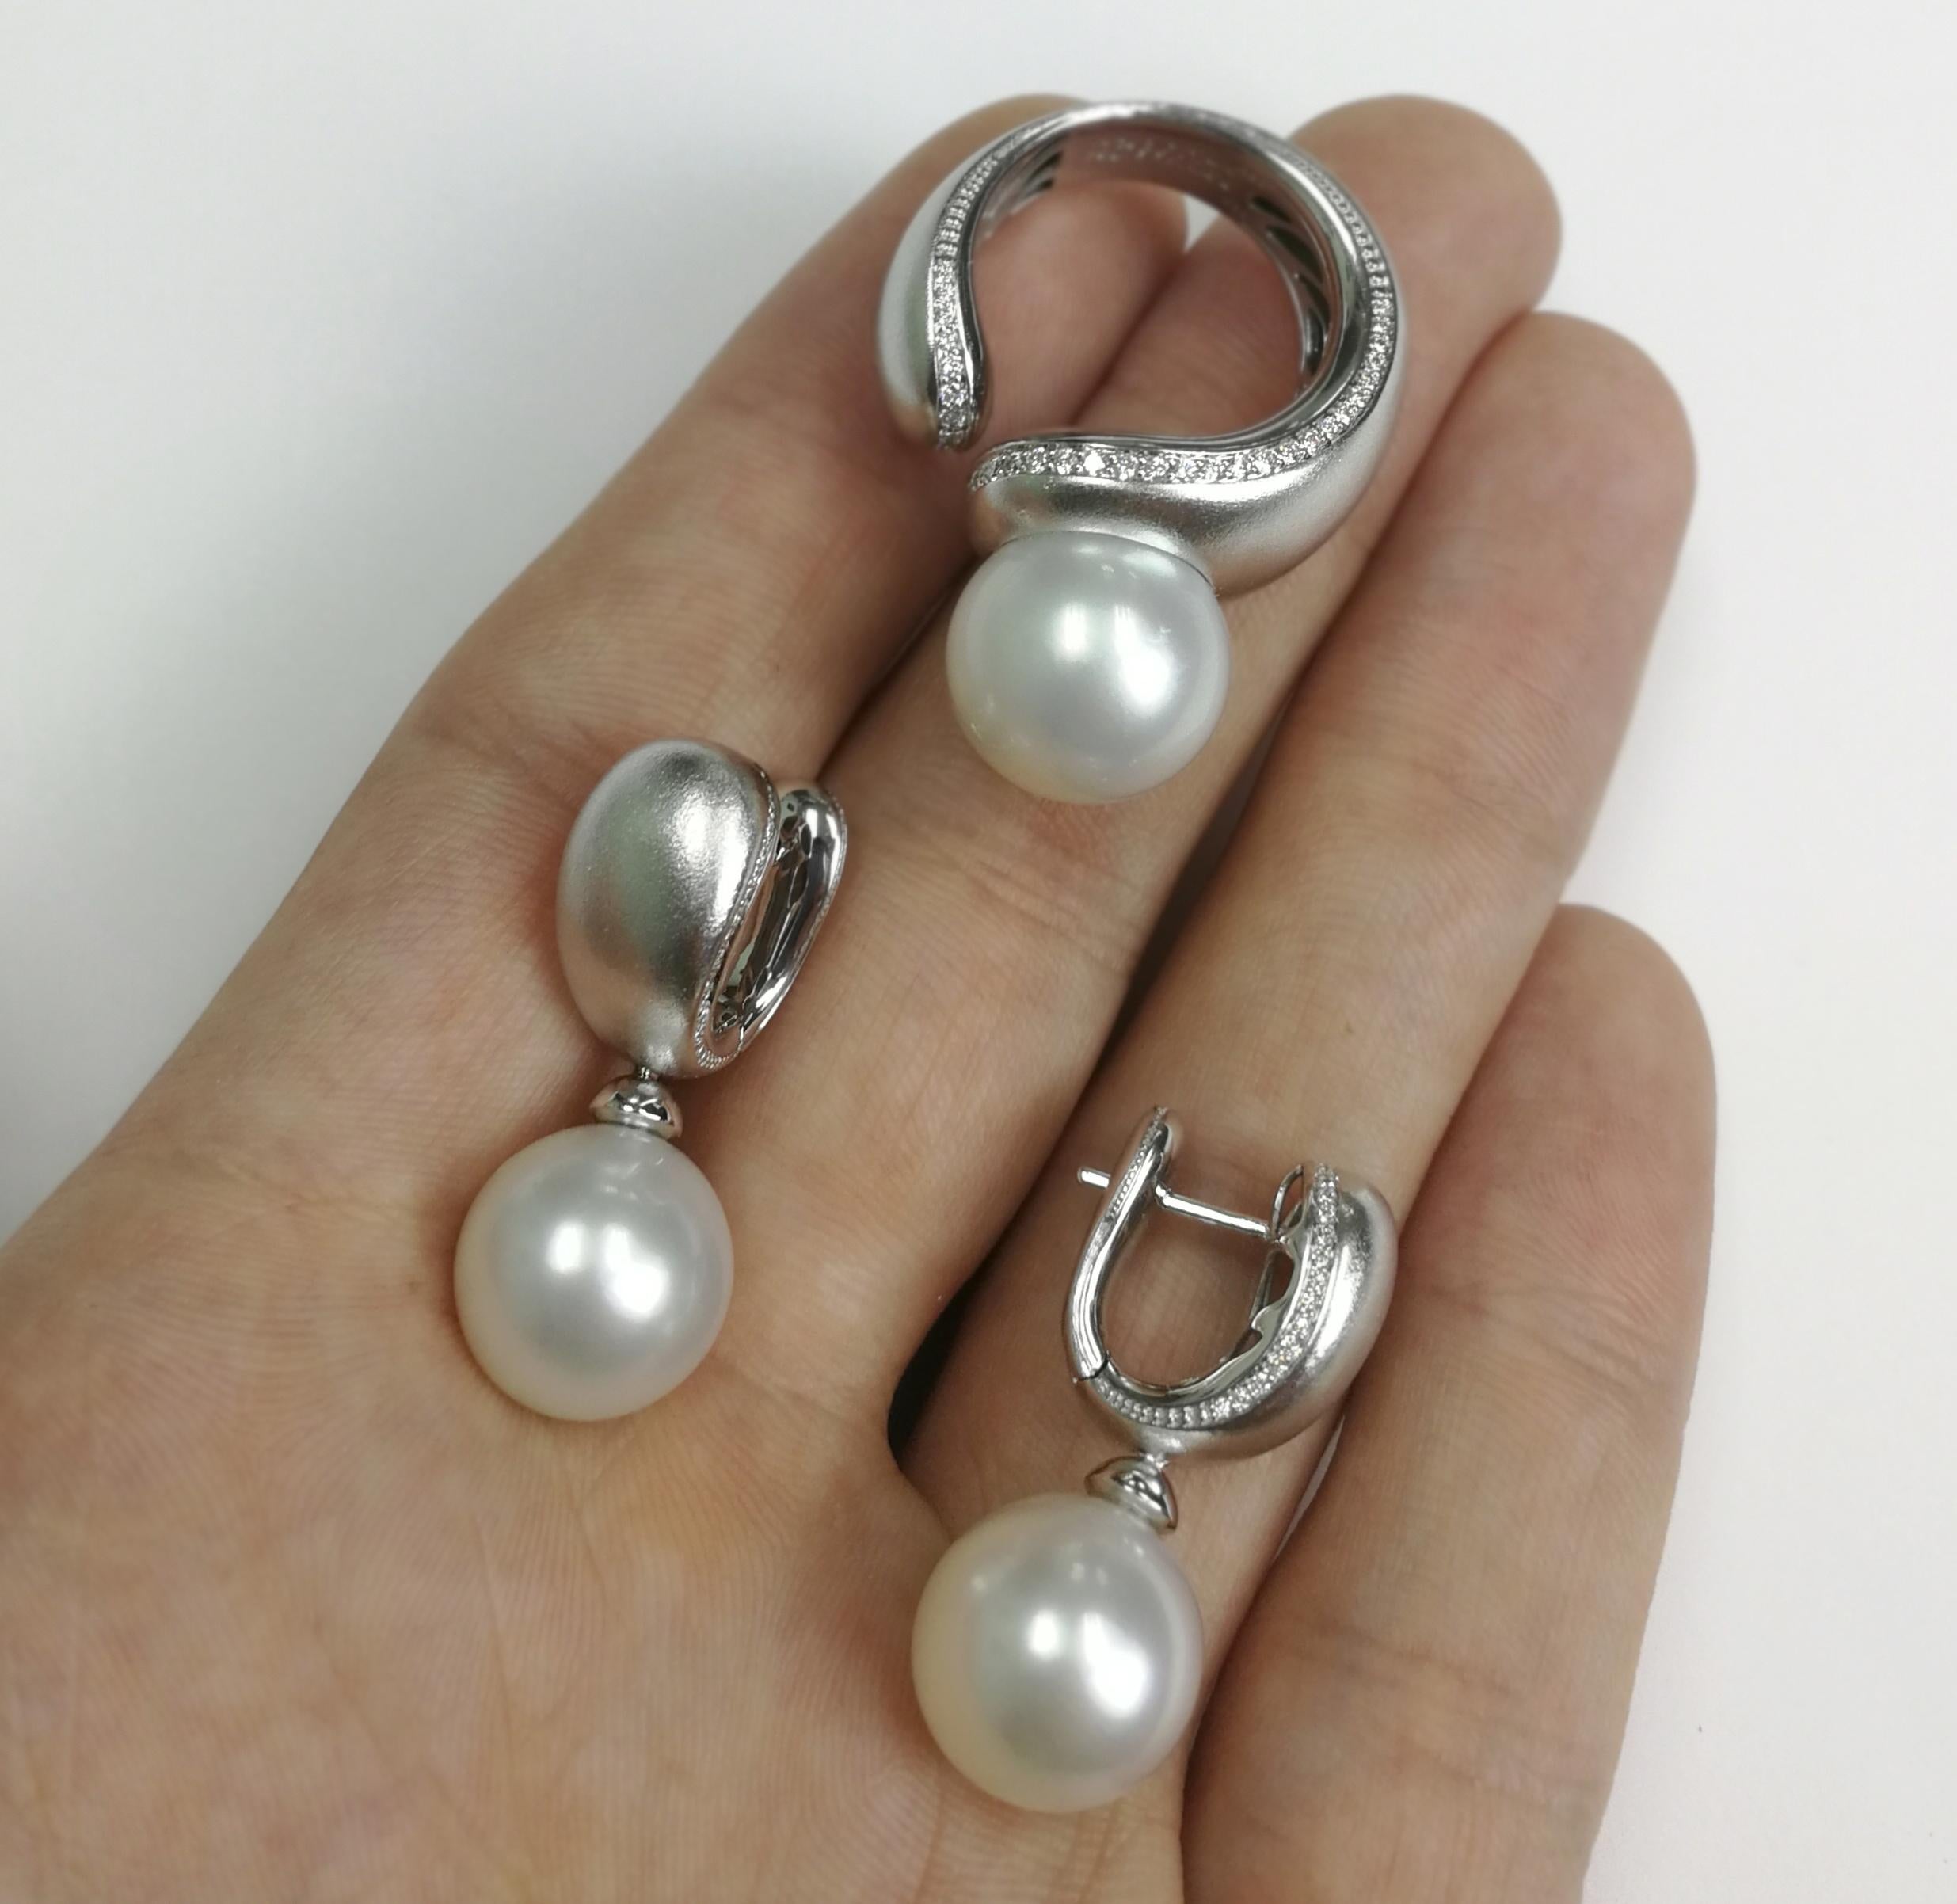 White South Sea Pearl Diamonds Cocktail Ring Earrings Suite

Very comfortable Set. Smooth design in combine with a smooth surface of a pearl gives perfect result. Pure white diamonds carefully selected to support the pearl color. Pure triumph of